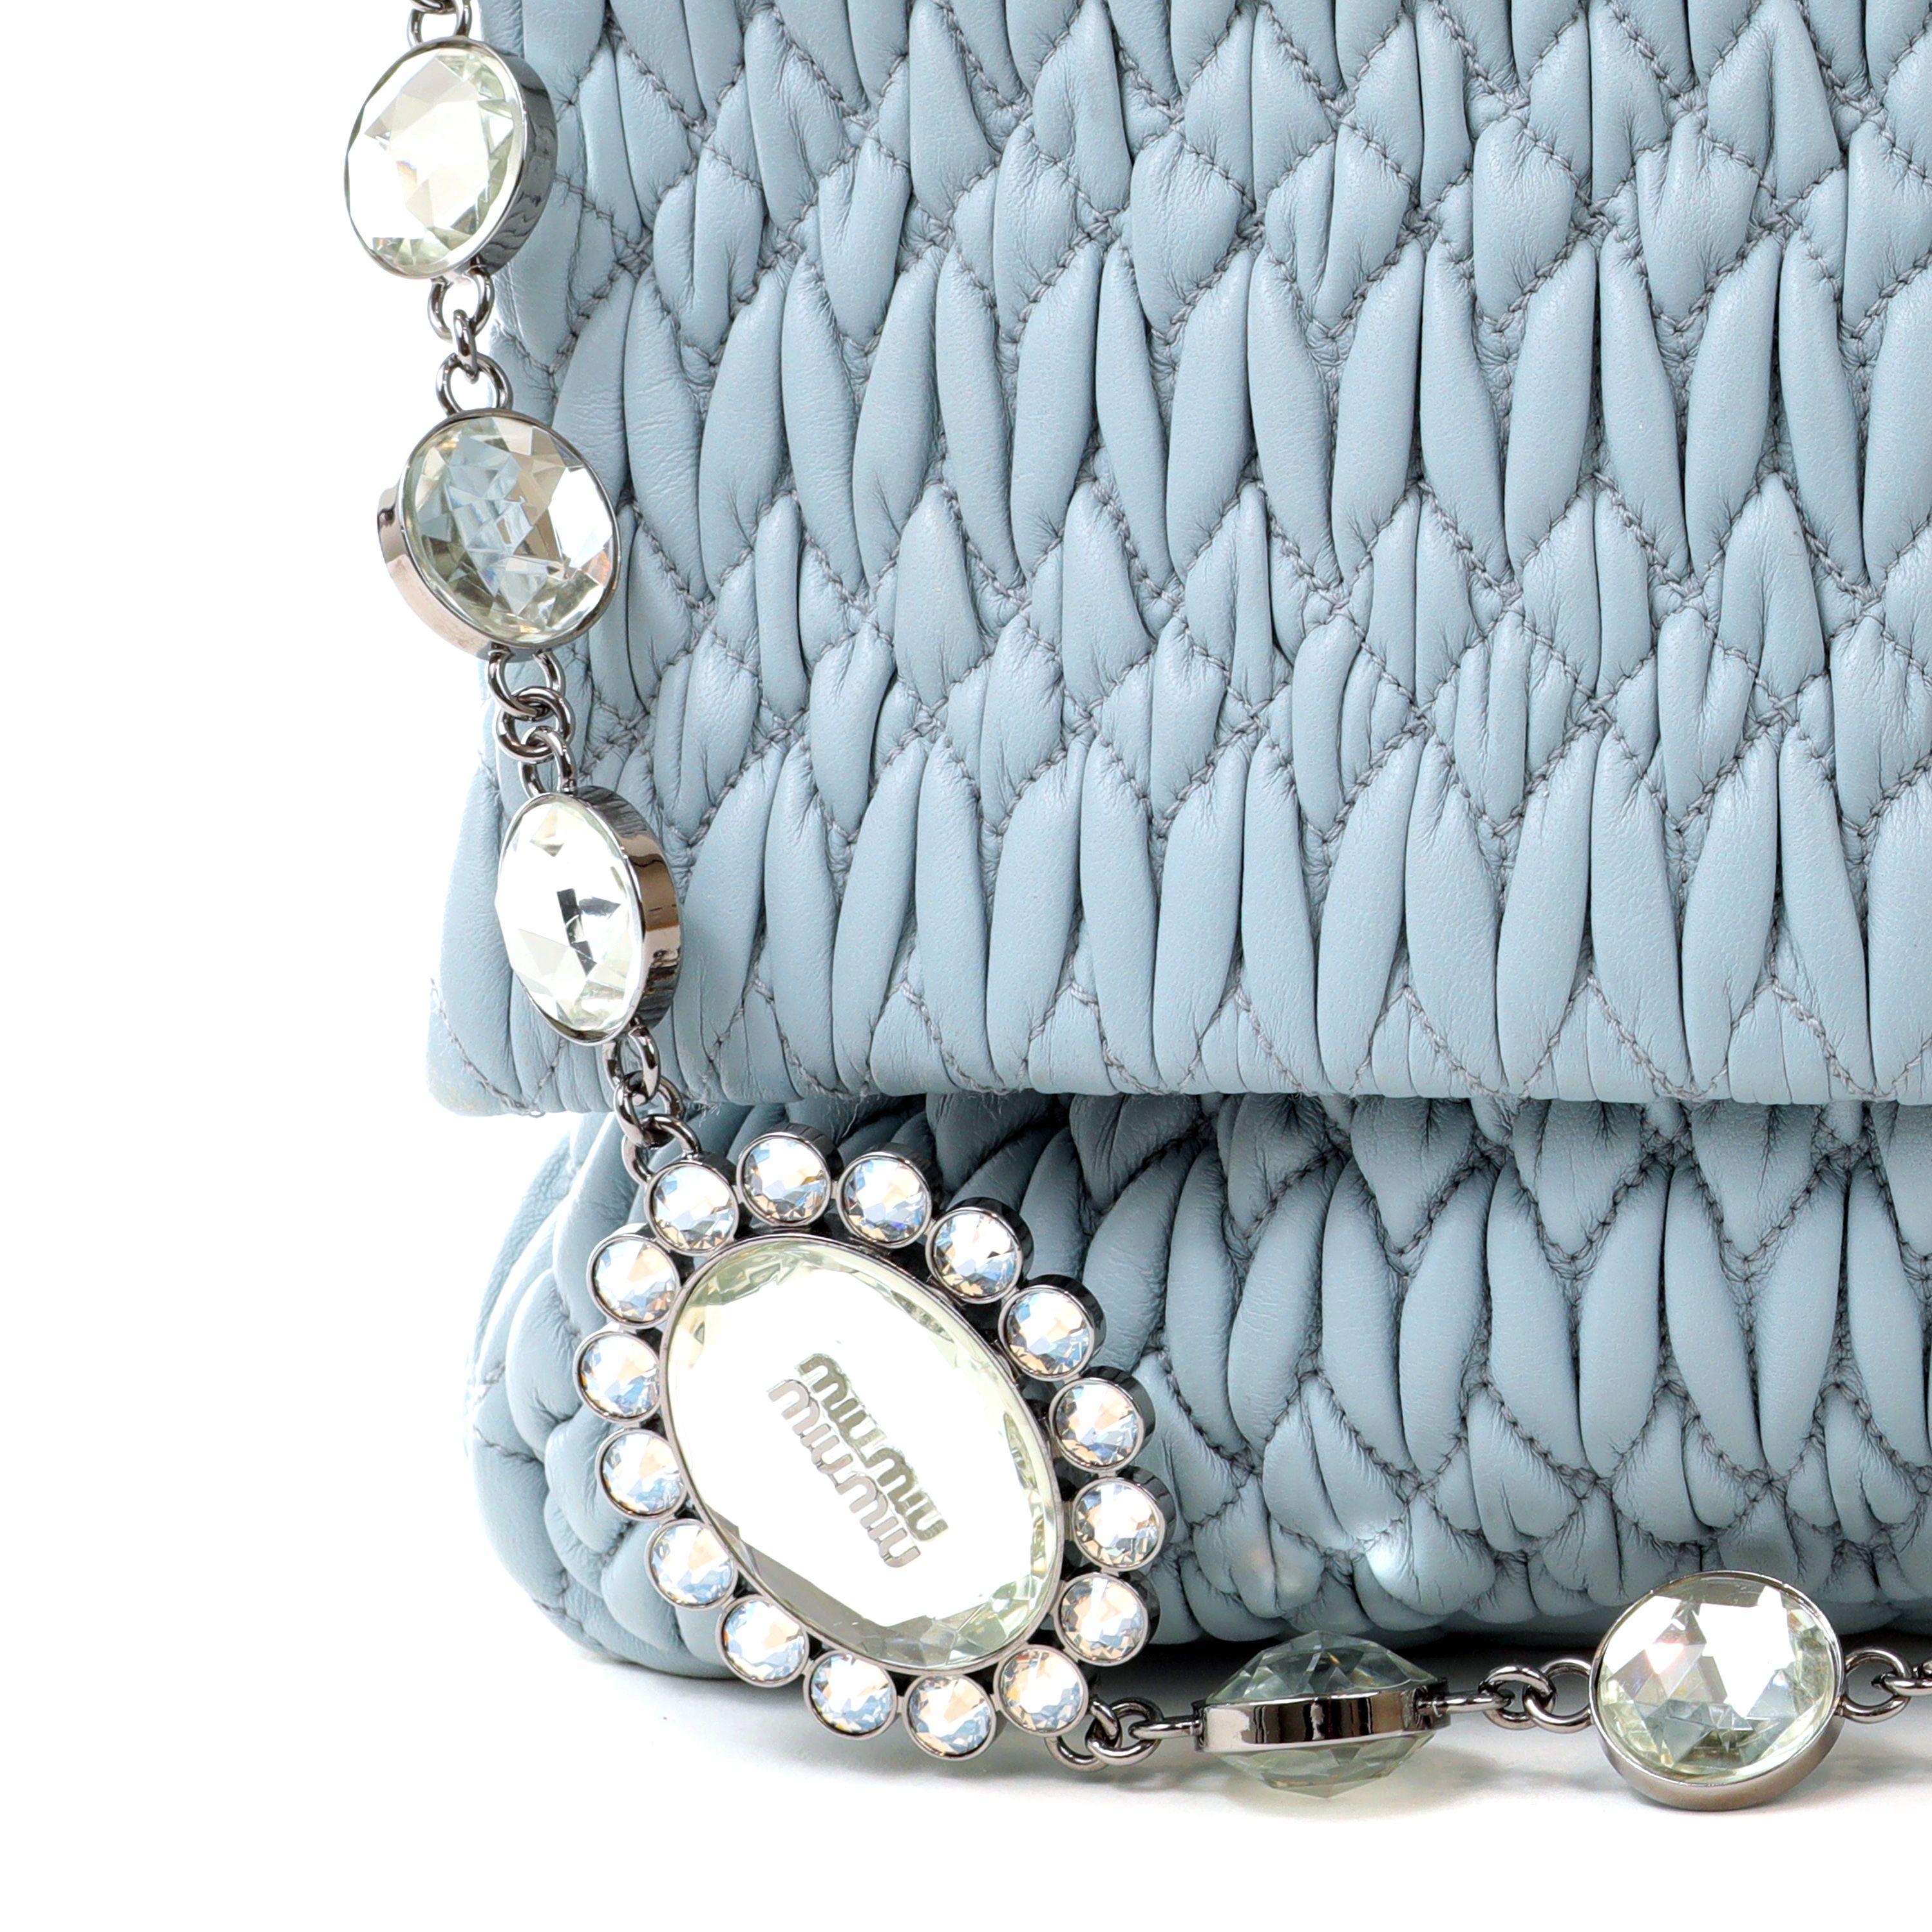 Miu Miu Dusty Blue Iconic Crystal Cloquè Large Bag with Silver Hardware In Excellent Condition For Sale In Palm Beach, FL